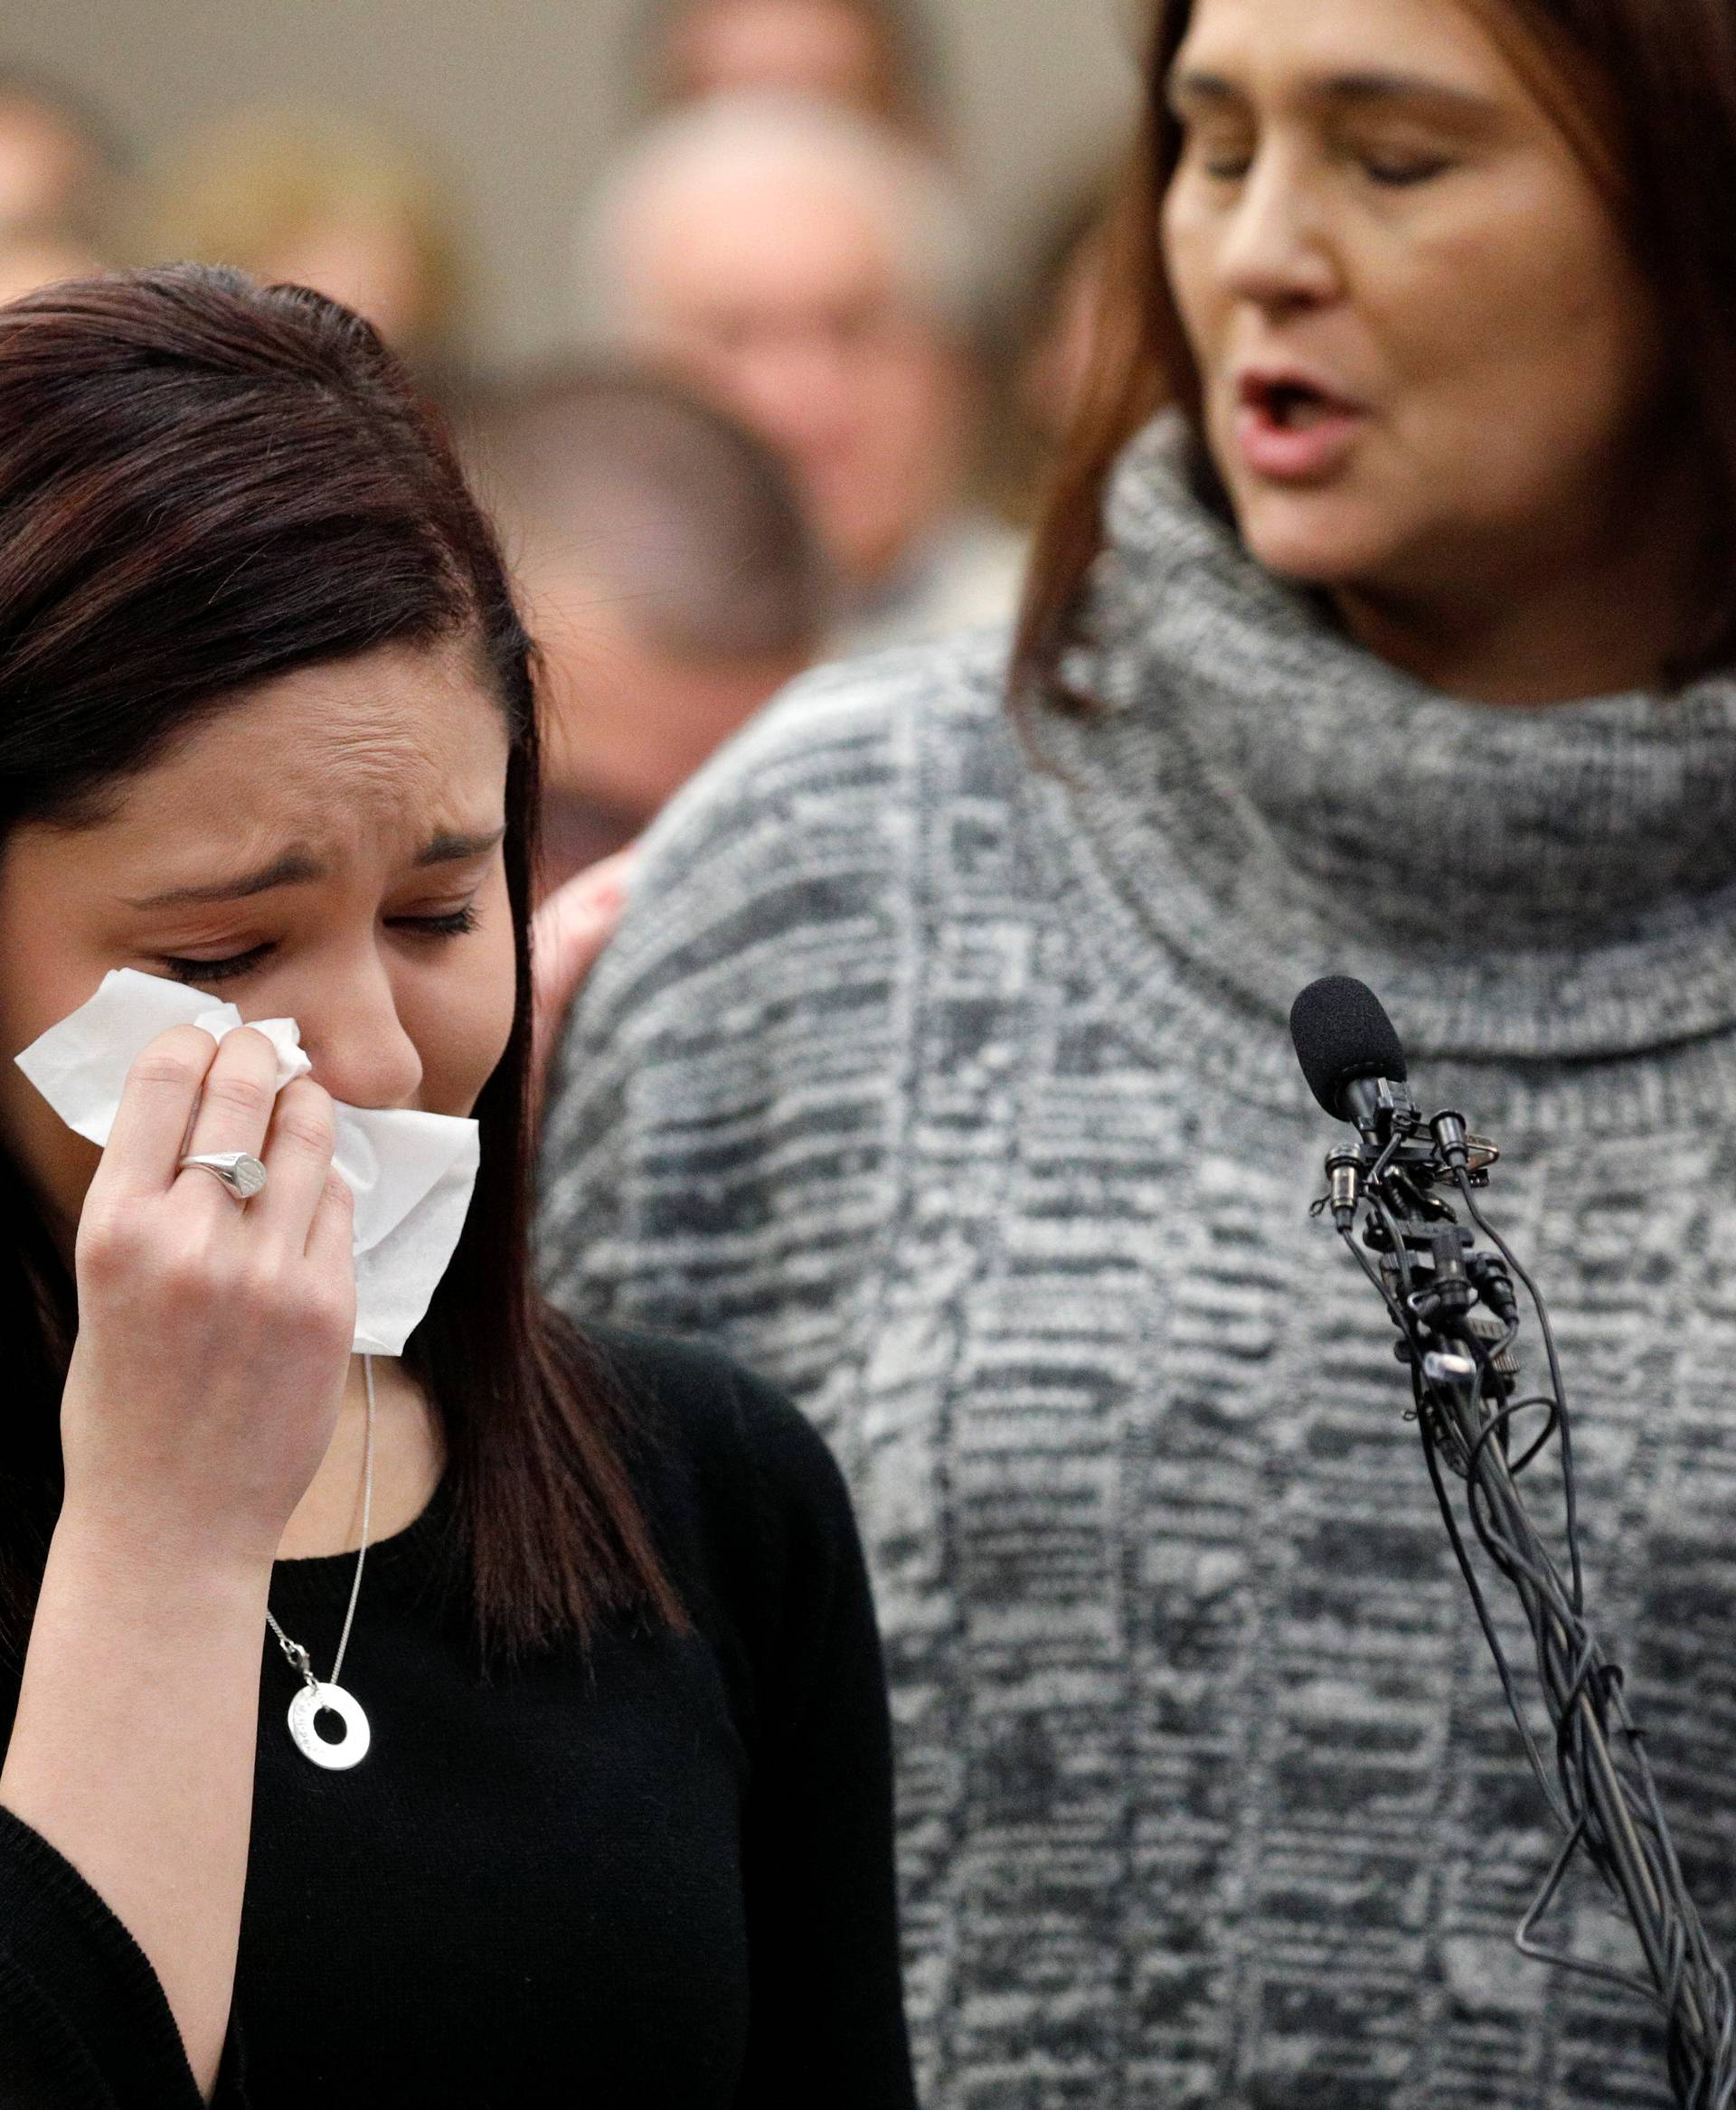 Victim Kaylee Lorincz wipes tears as she speaks at the sentencing hearing for Larry Nassar, a former team USA Gymnastics doctor who pleaded guilty in November 2017 to sexual assault charges, in Lansing